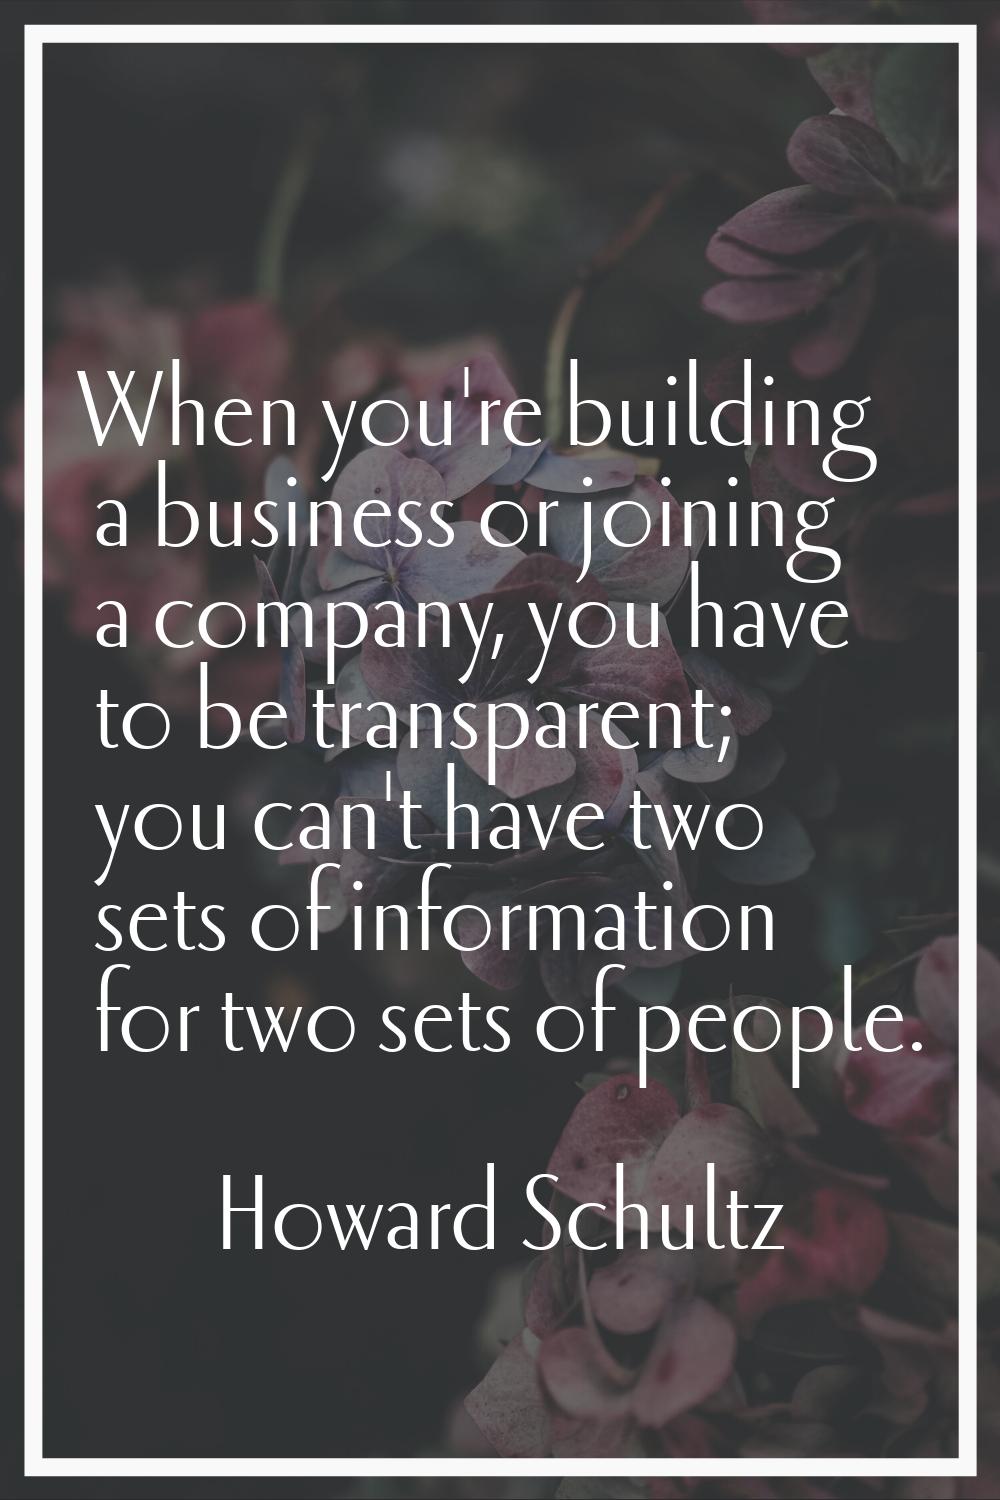 When you're building a business or joining a company, you have to be transparent; you can't have tw